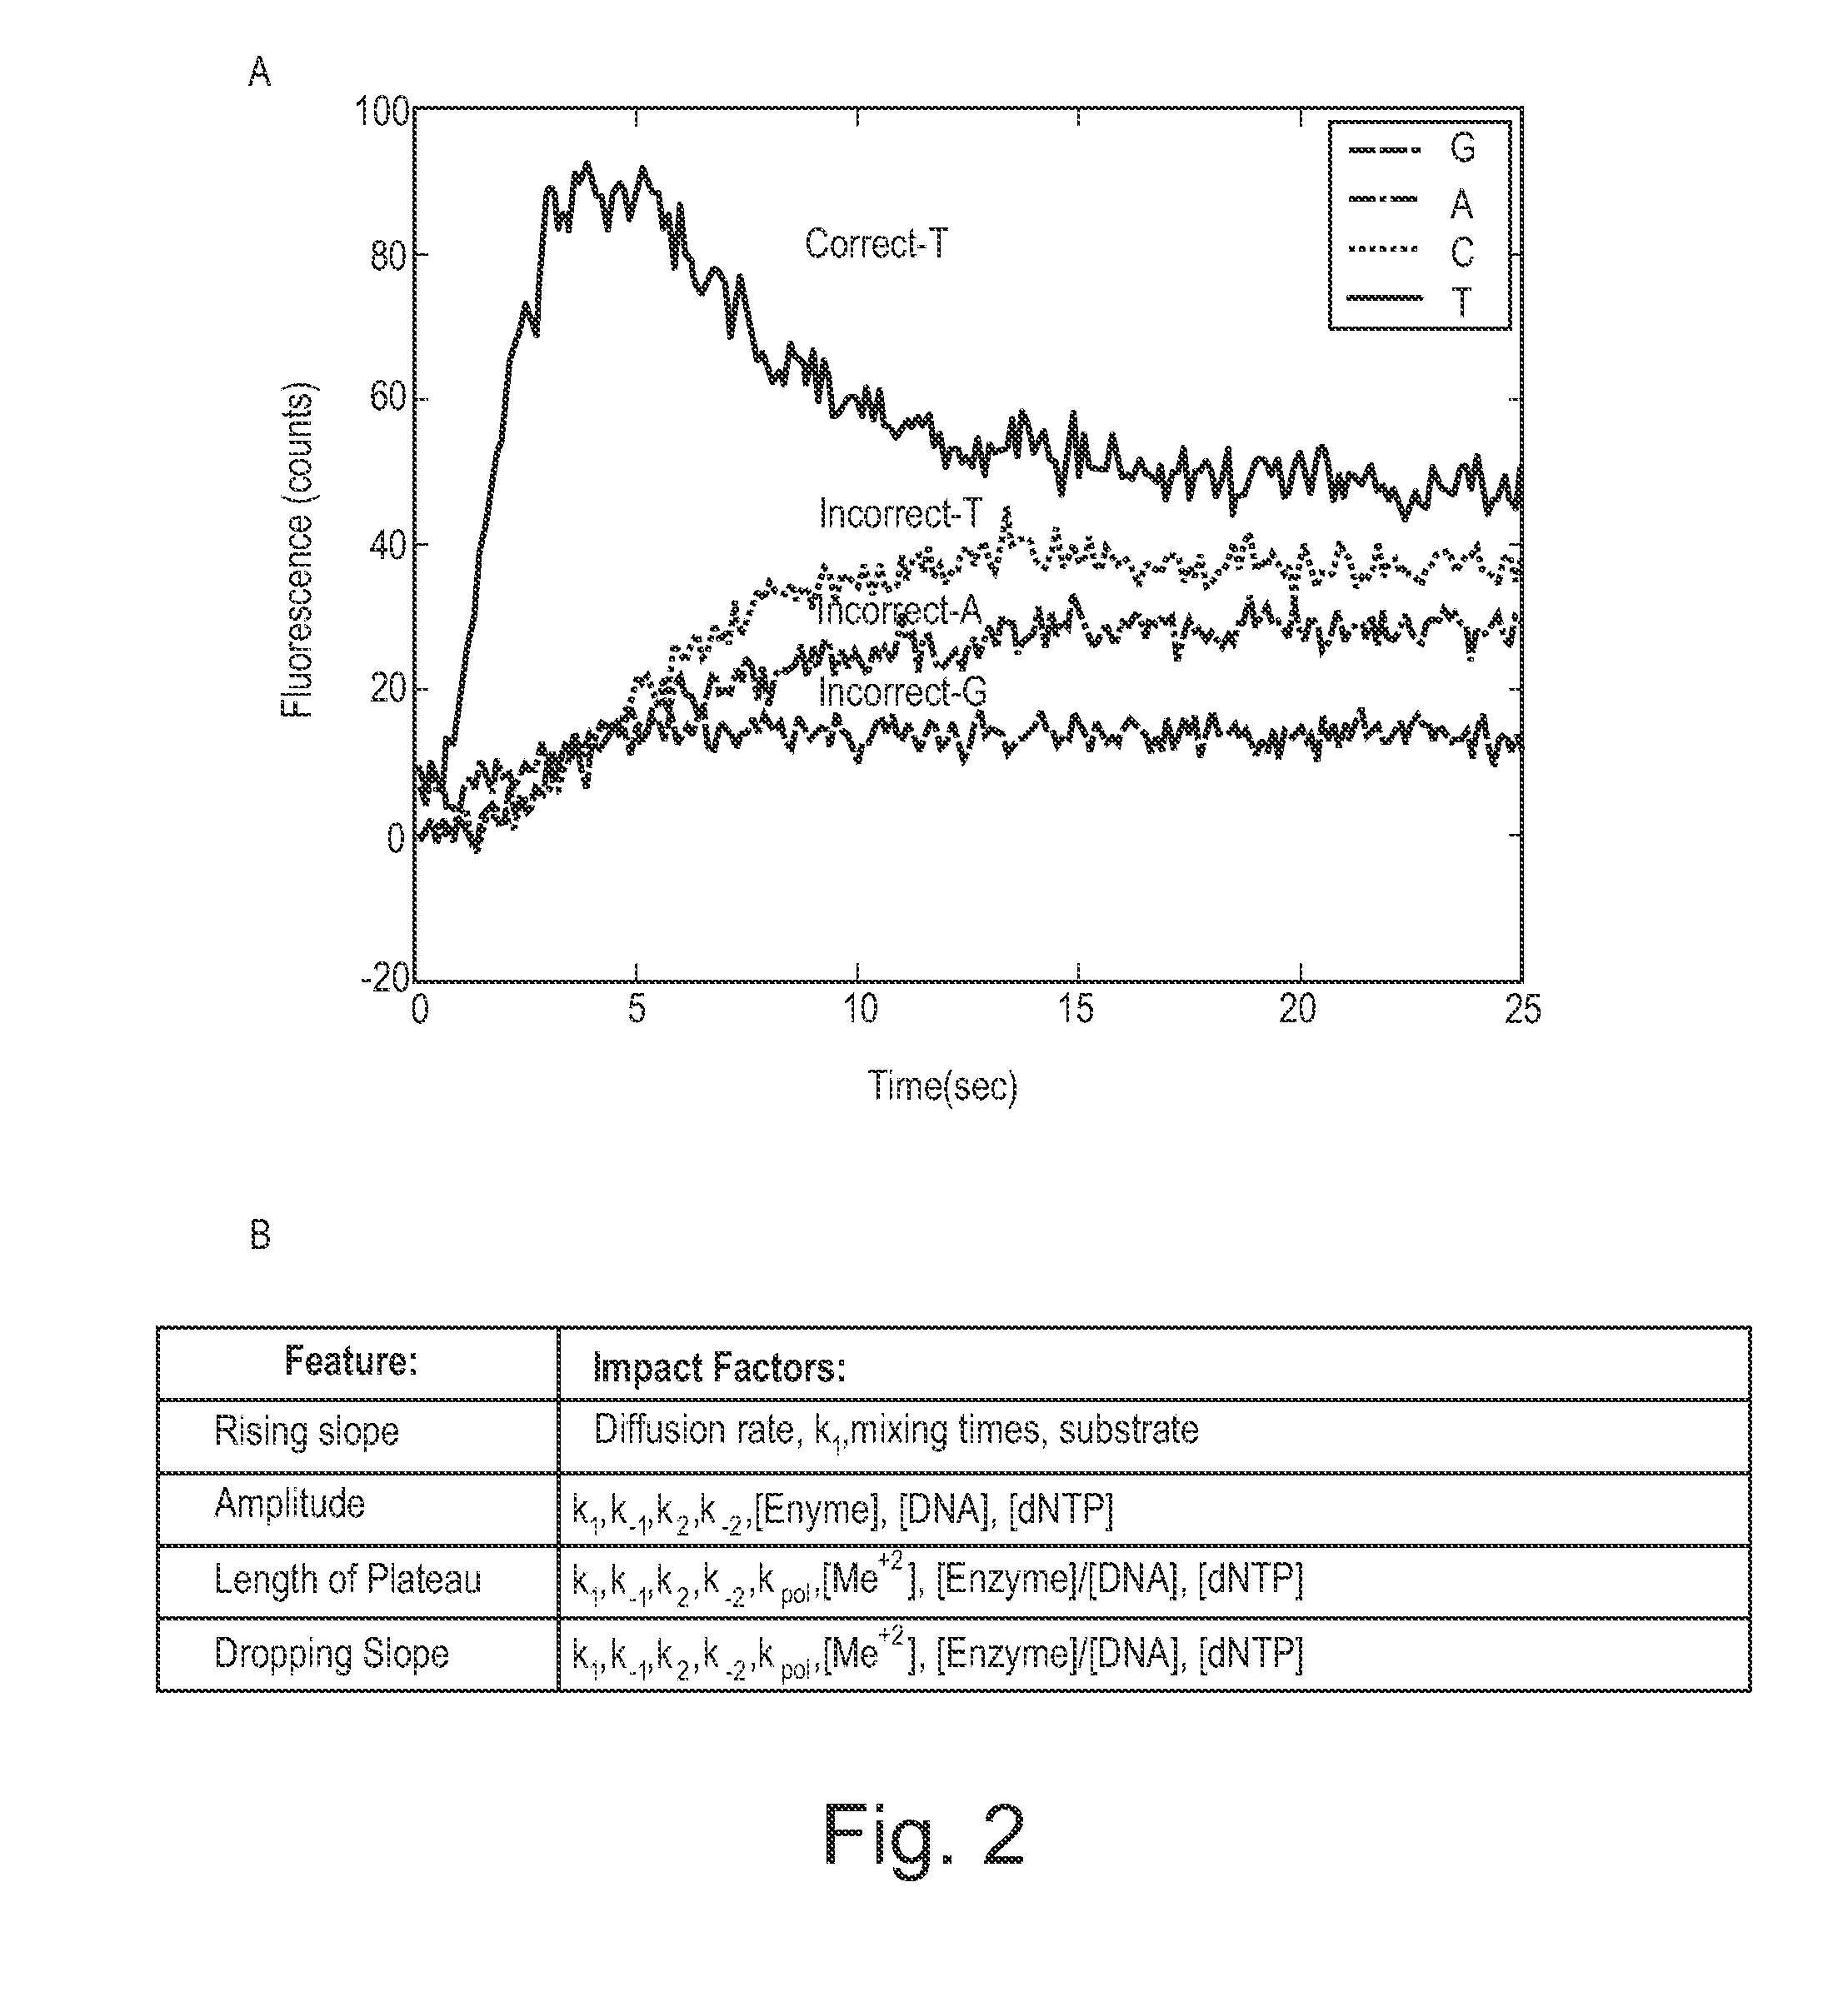 Apparatus and methods for kinetic analysis and determination of nucleic acid sequences